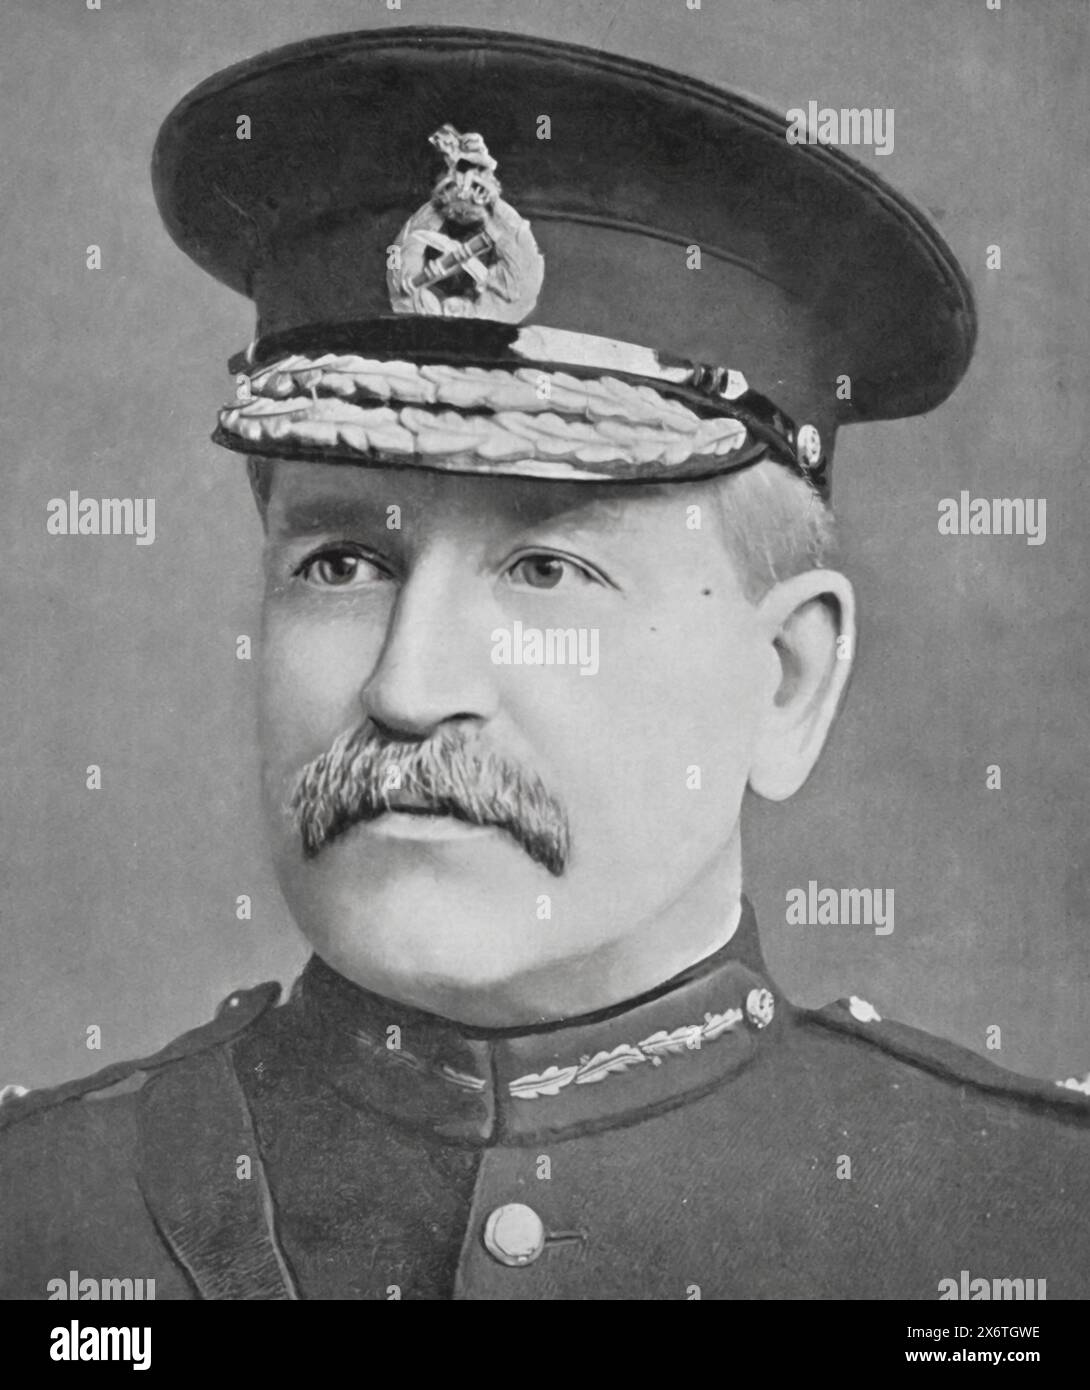 A portrait of General Sir Charles C. Monro, Supreme Commander of the British troops in the Balkan area during the First World War. Monro is notable for his role in the successful evacuation of Allied forces from Gallipoli in 1915, following a failed campaign to secure a sea route to Russia. His leadership and actions saved many lives during that operation. Stock Photo